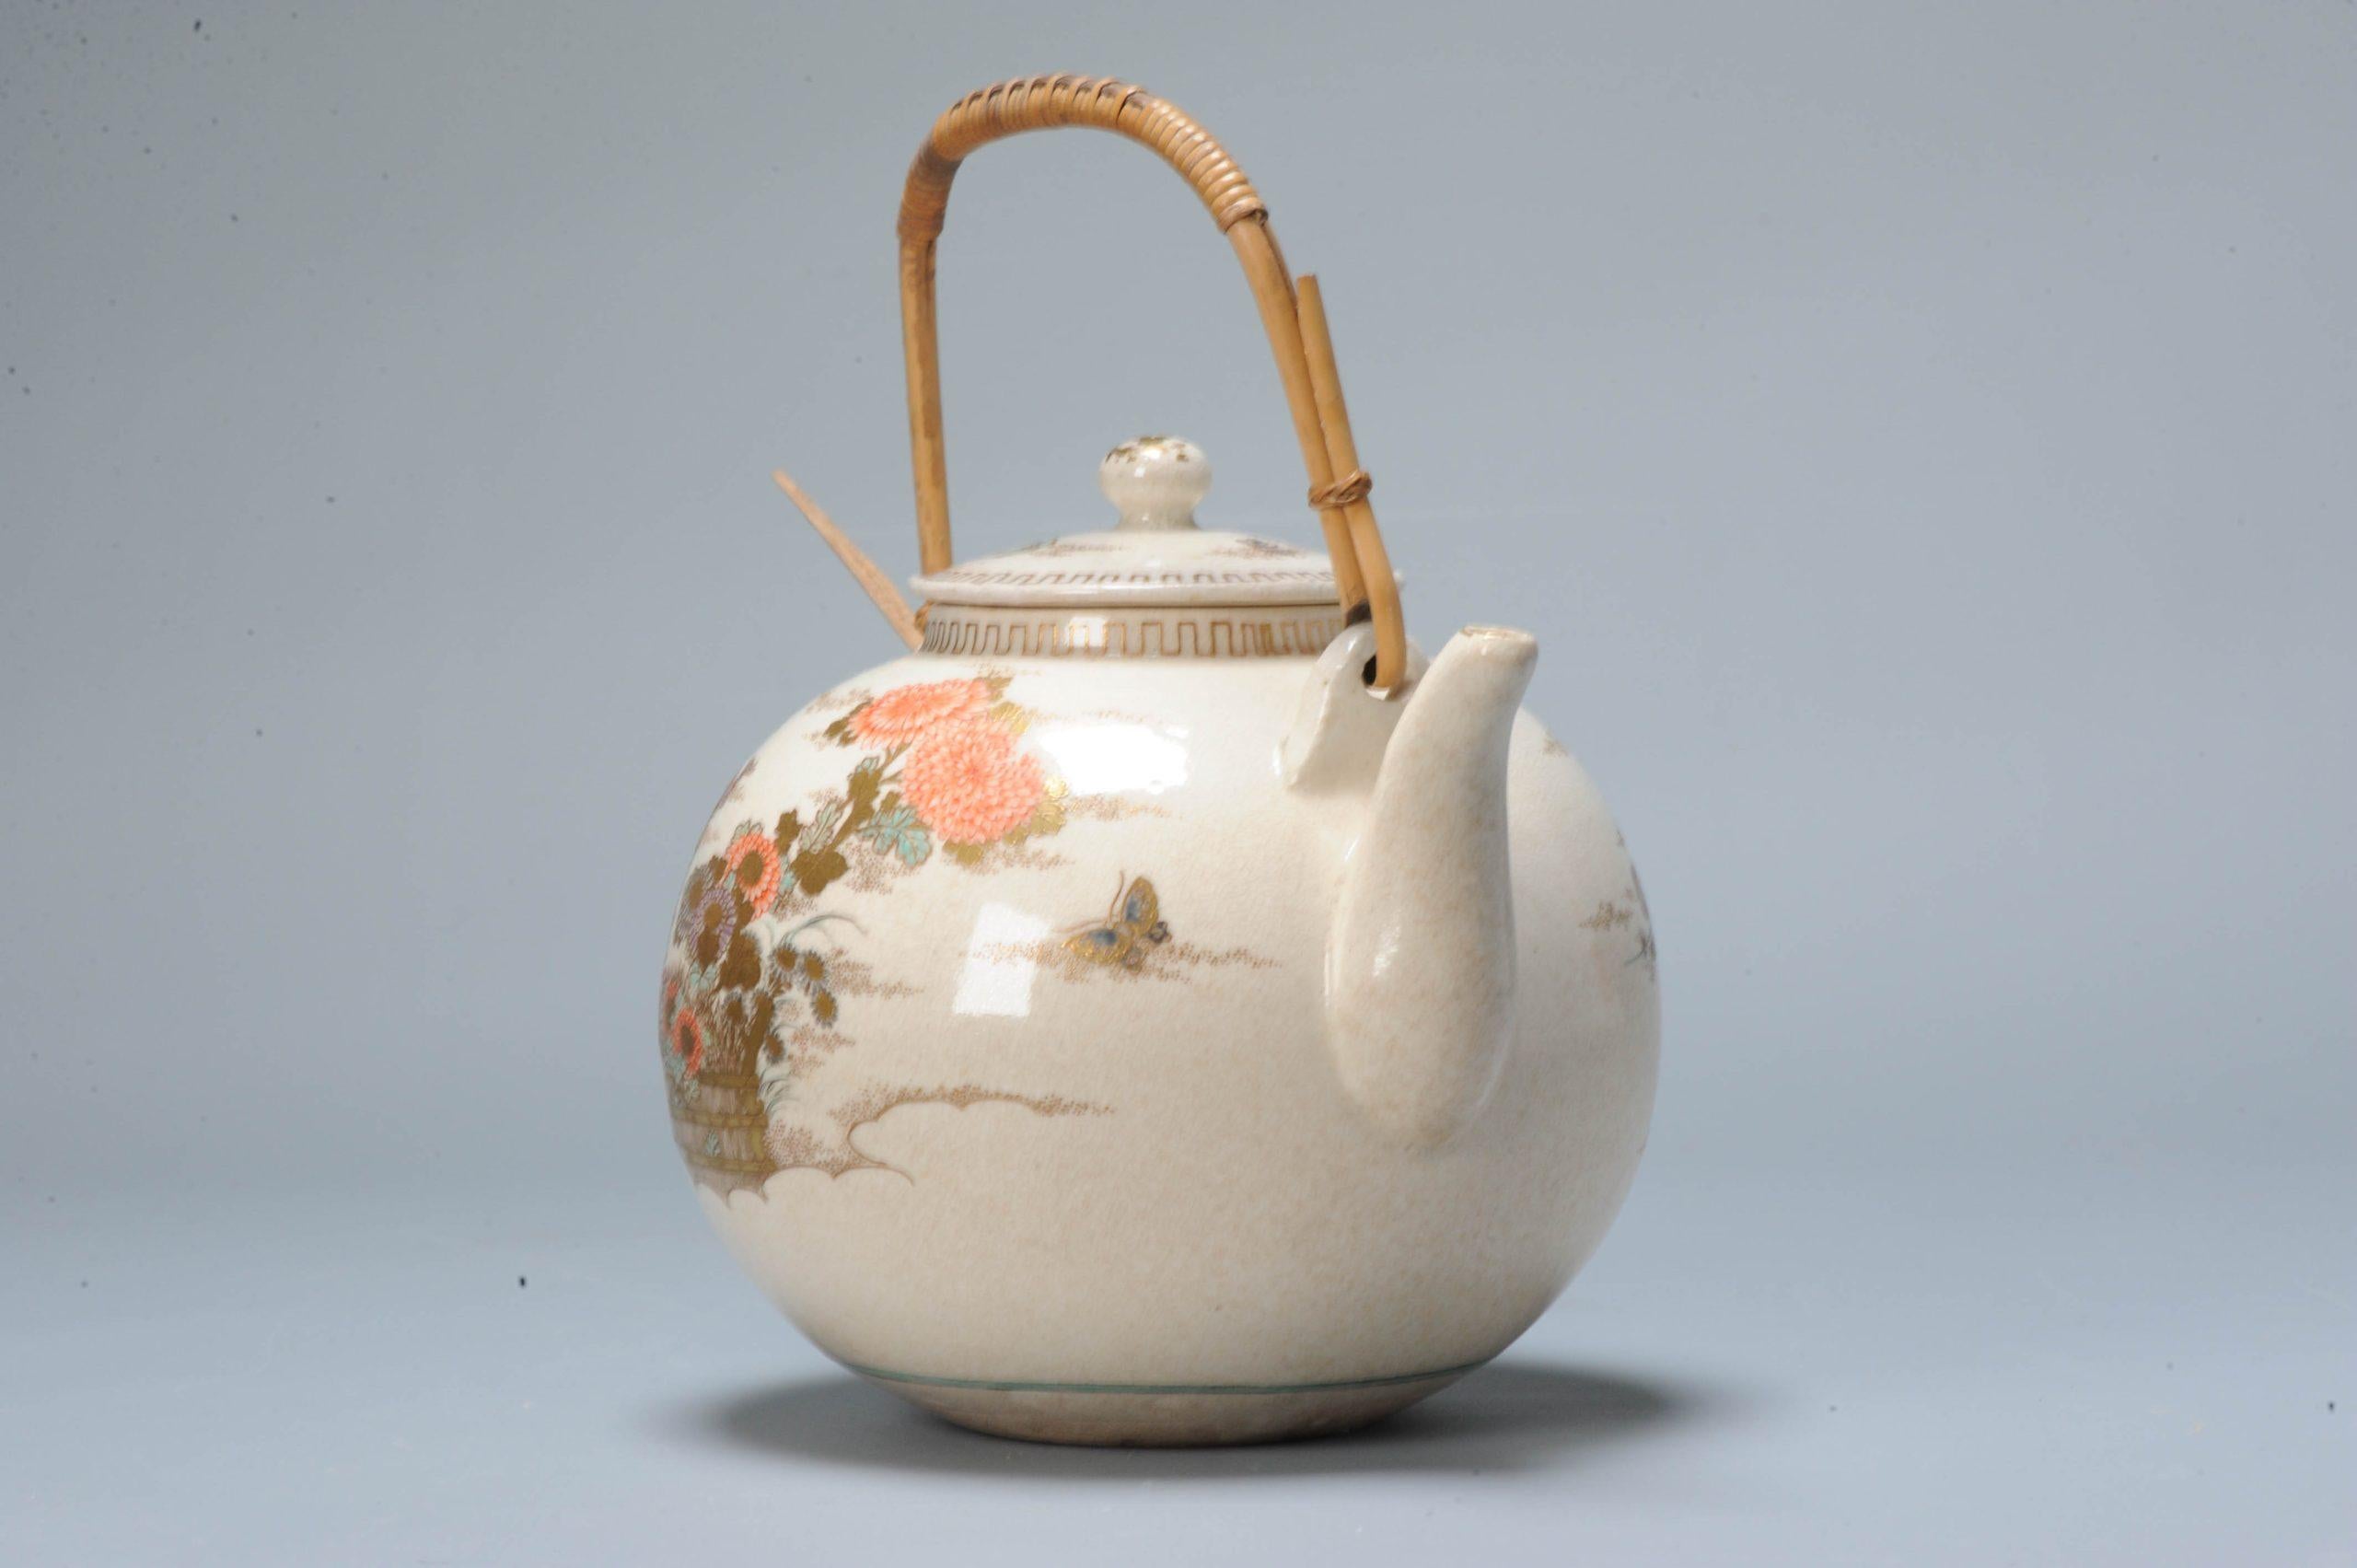 A lovely Satsuma Teapot.

Additional information:
Material: Porcelain & Pottery
Japanese Style: Satsuma
Region of Origin: Japan
Period: 19th century, 20th century Meiji Periode (1867-1912)
Age: 19th century
Original/Reproduction: Original
Condition: